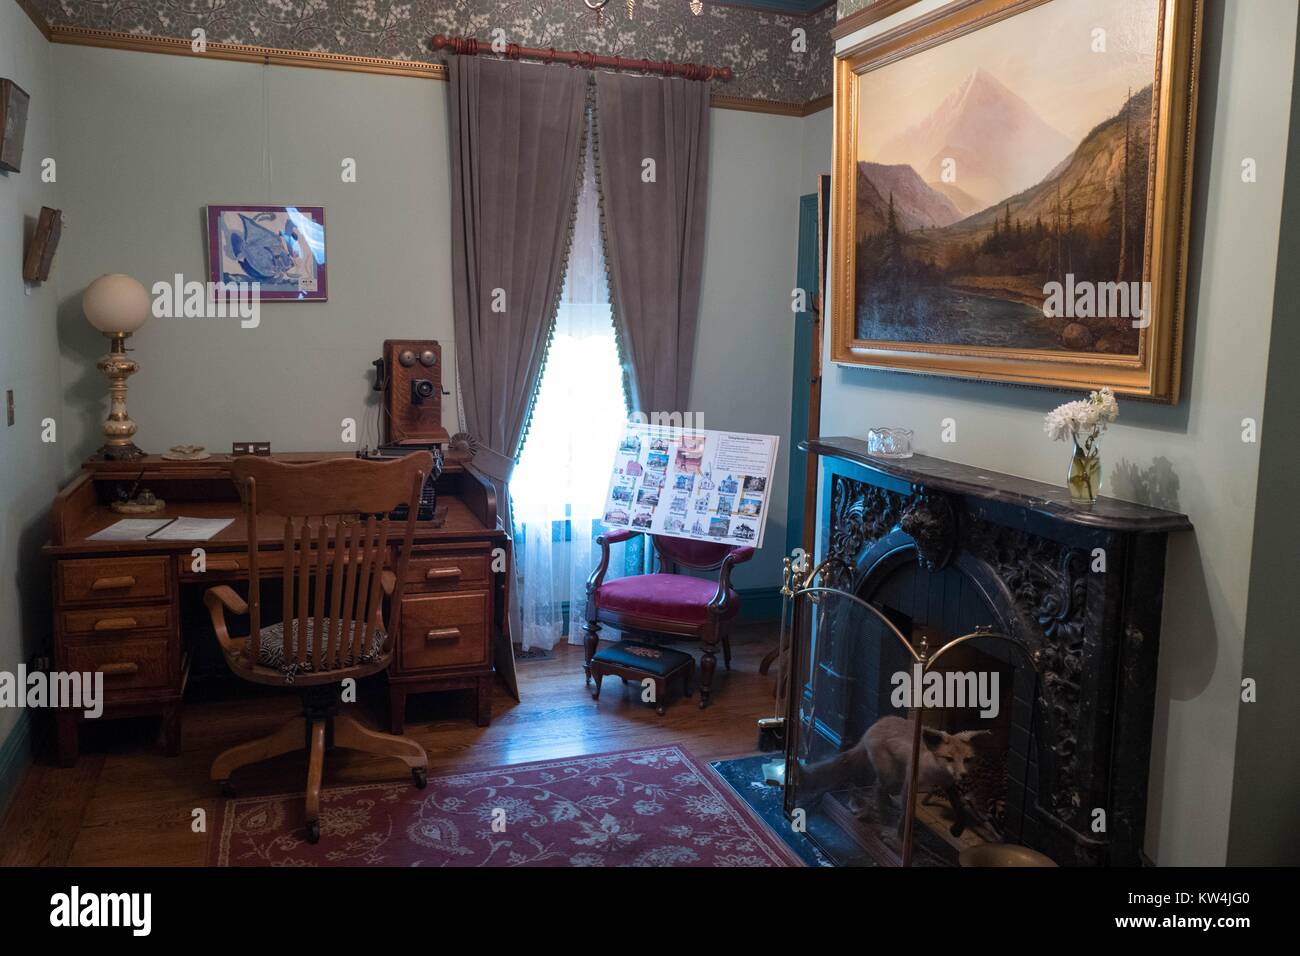 Interior view of a study at the Rengstorff House, a restored Victorian home and one of the first houses built in the Silicon Valley town of Mountain View, California, August 24, 2016. Stock Photo